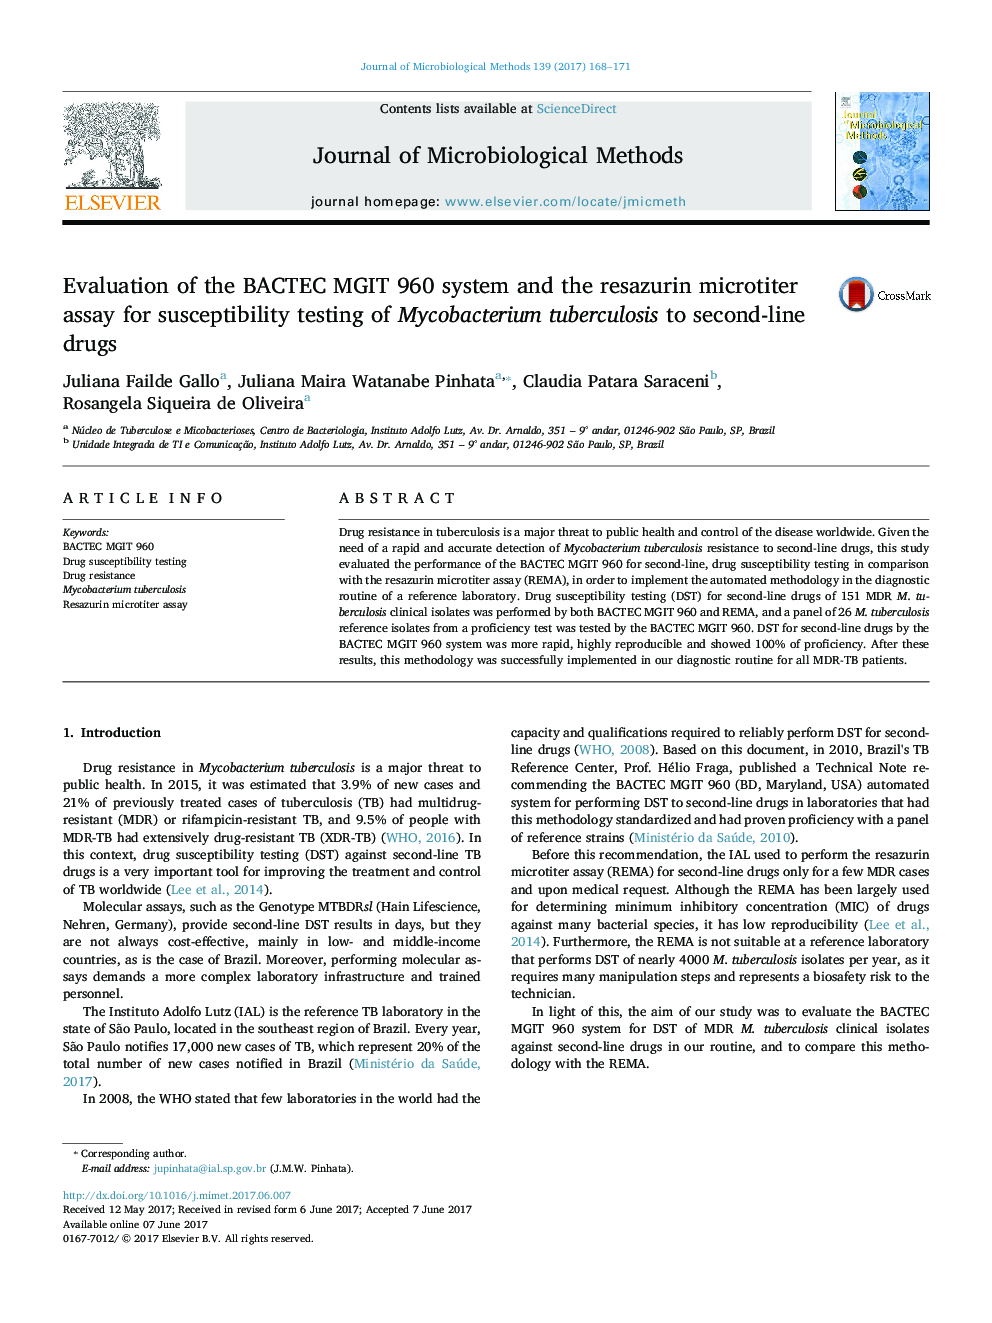 Evaluation of the BACTEC MGIT 960 system and the resazurin microtiter assay for susceptibility testing of Mycobacterium tuberculosis to second-line drugs